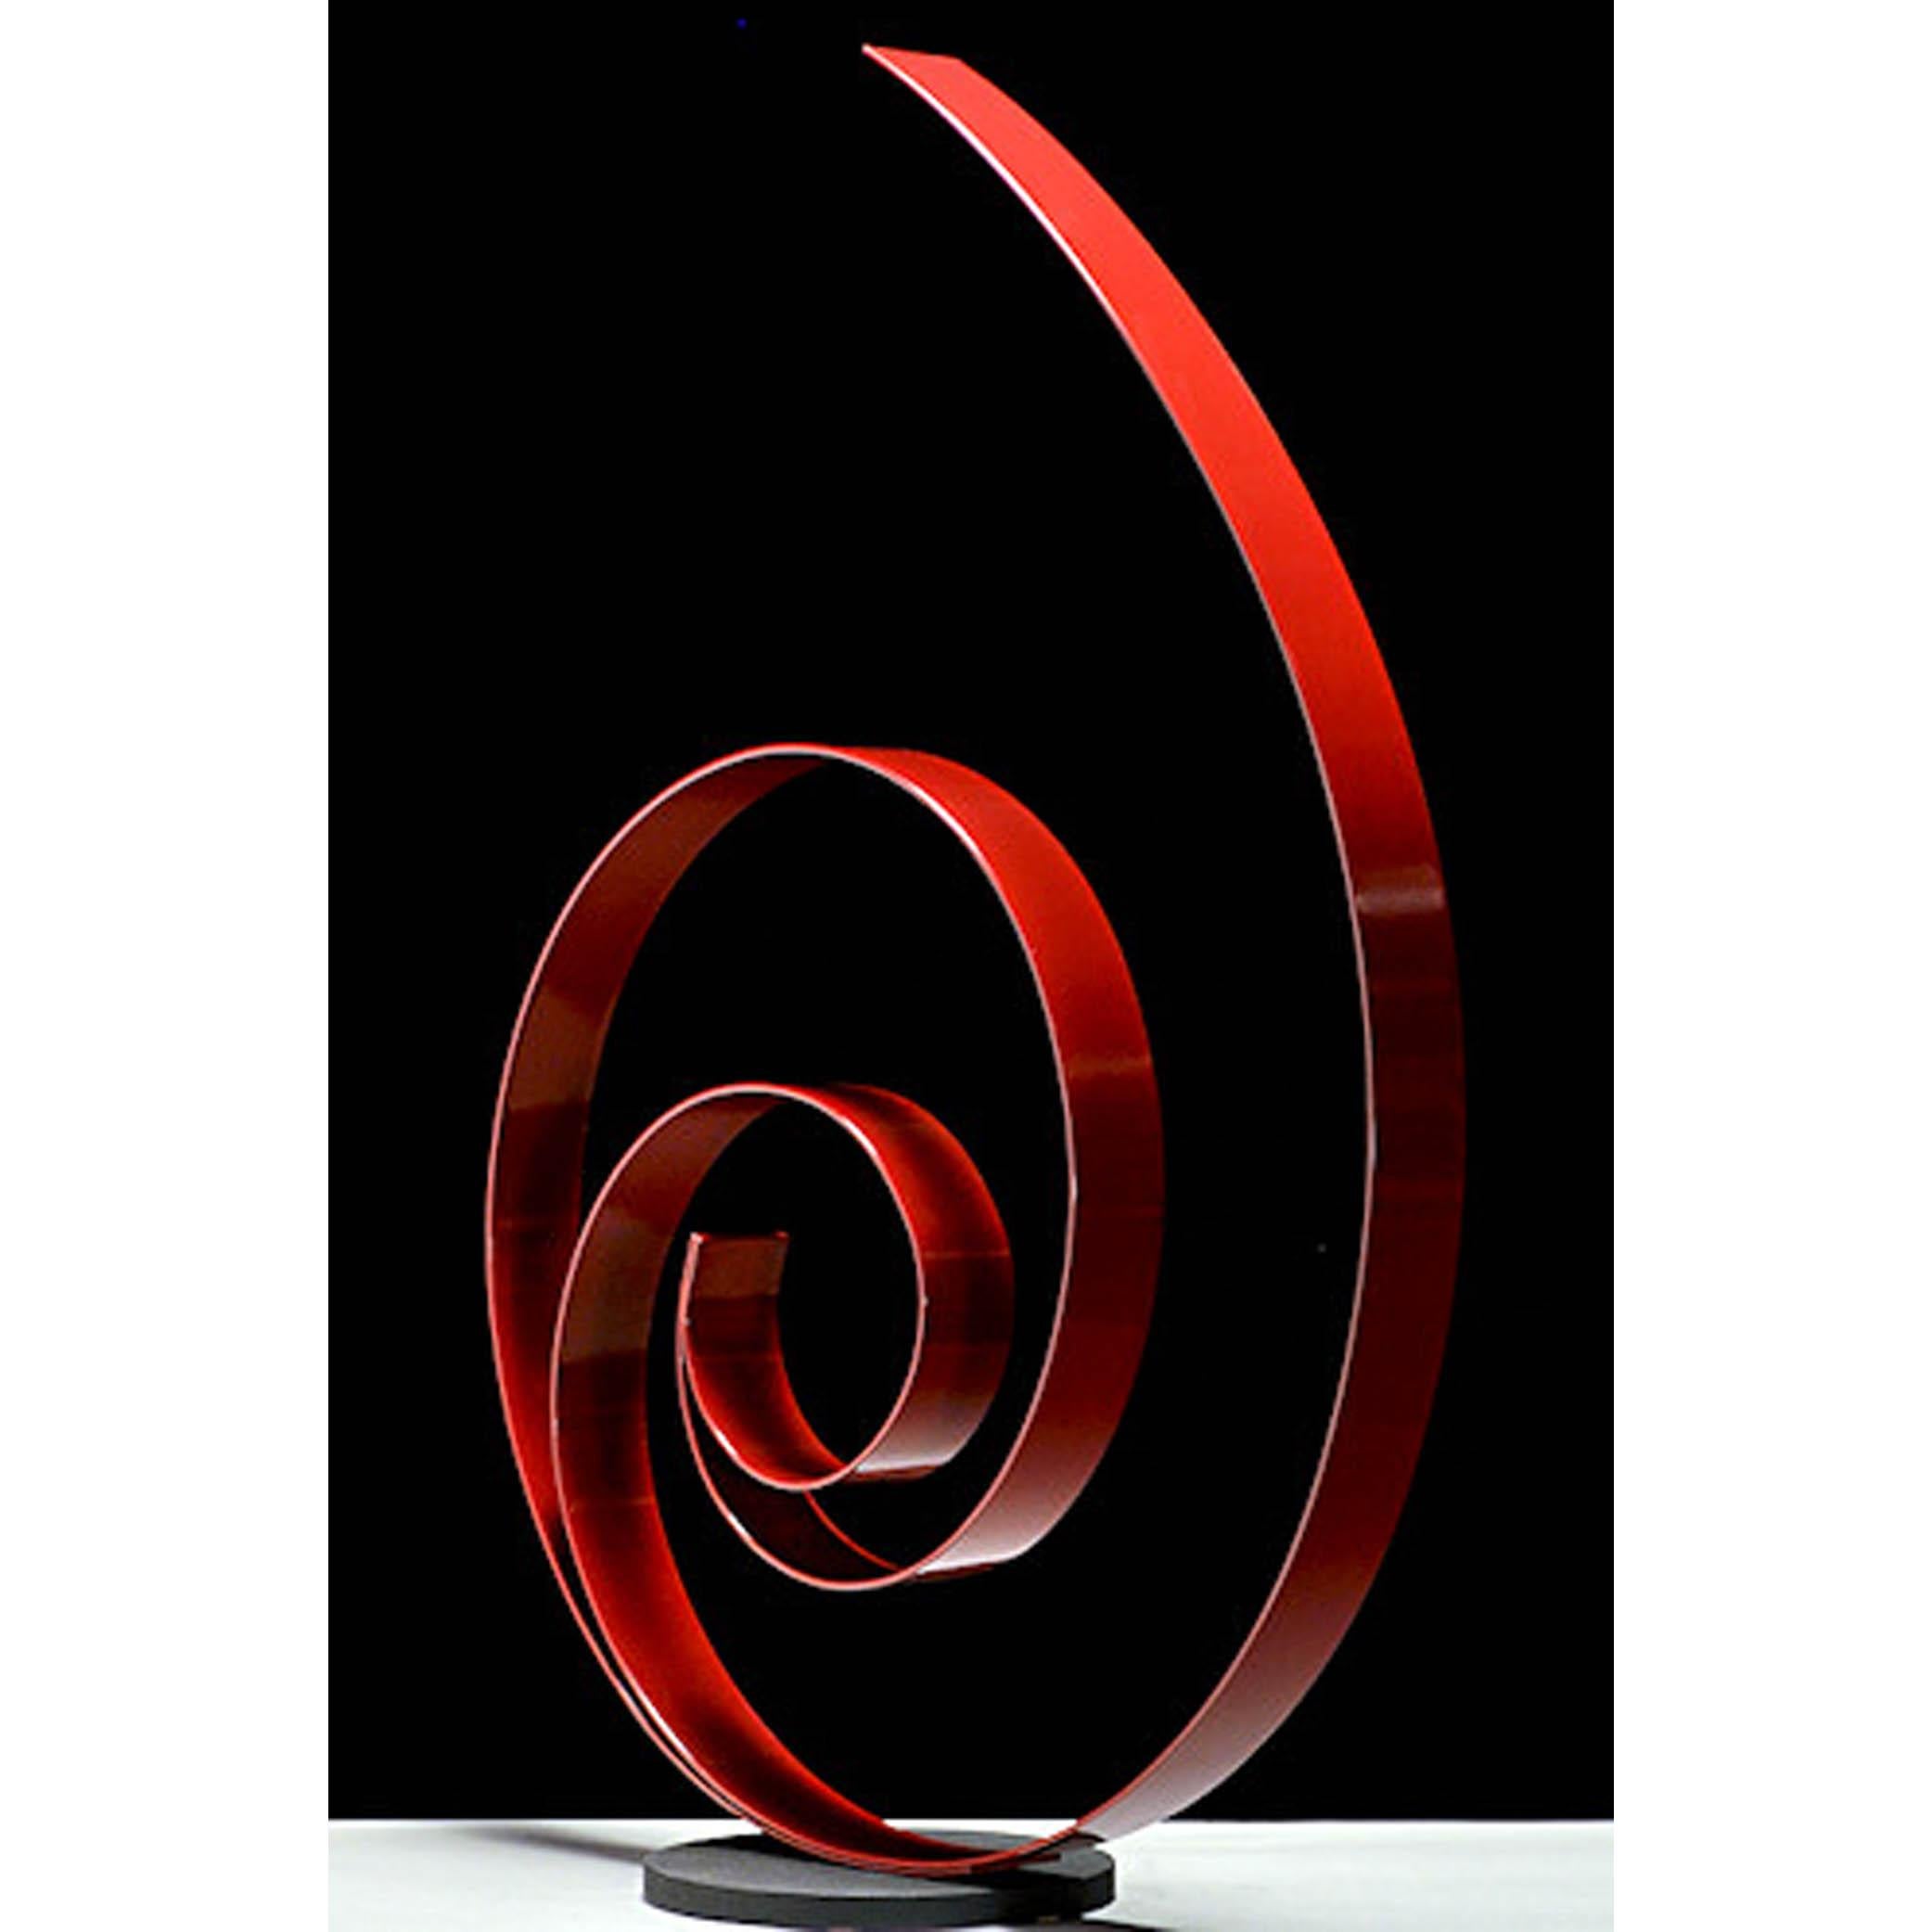 Damon Hyldreth Abstract Sculpture - Knot #78R 1/12